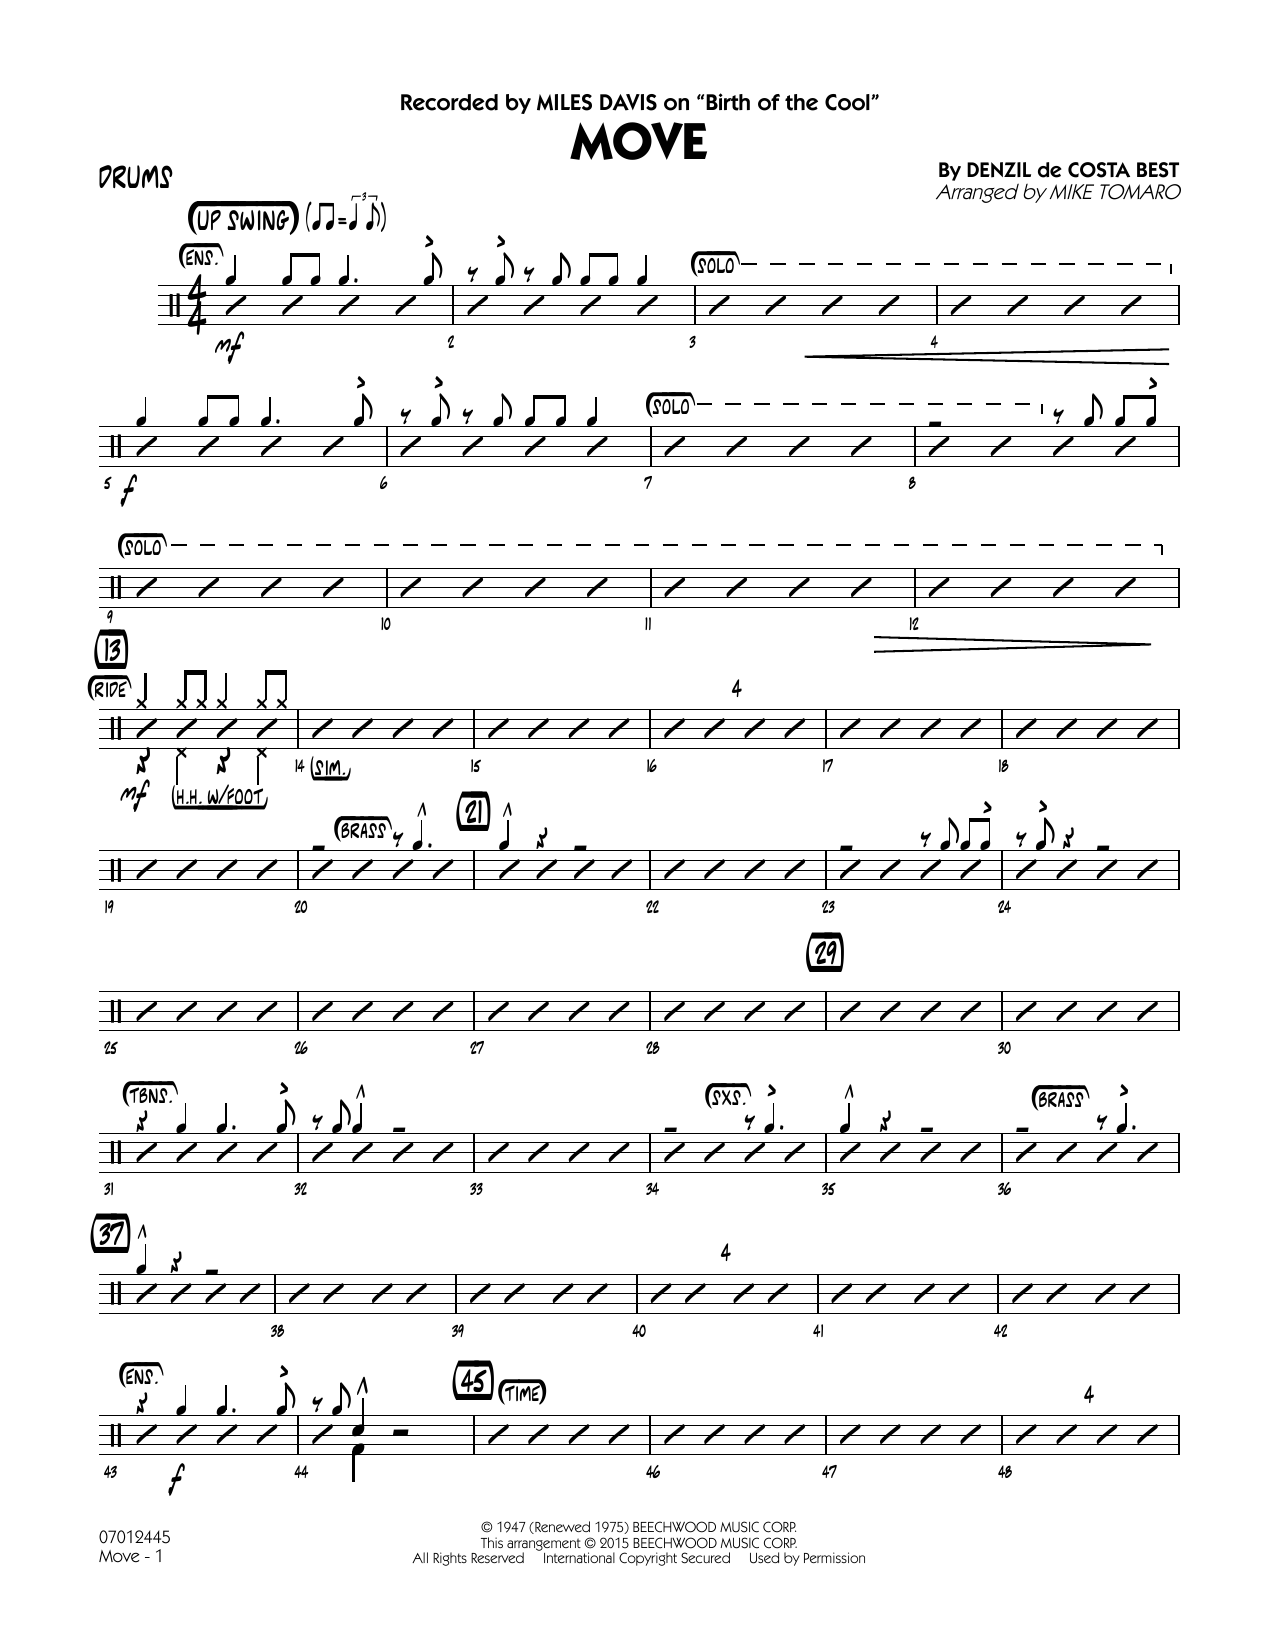 Mike Tomaro Move - Drums sheet music notes and chords. Download Printable PDF.